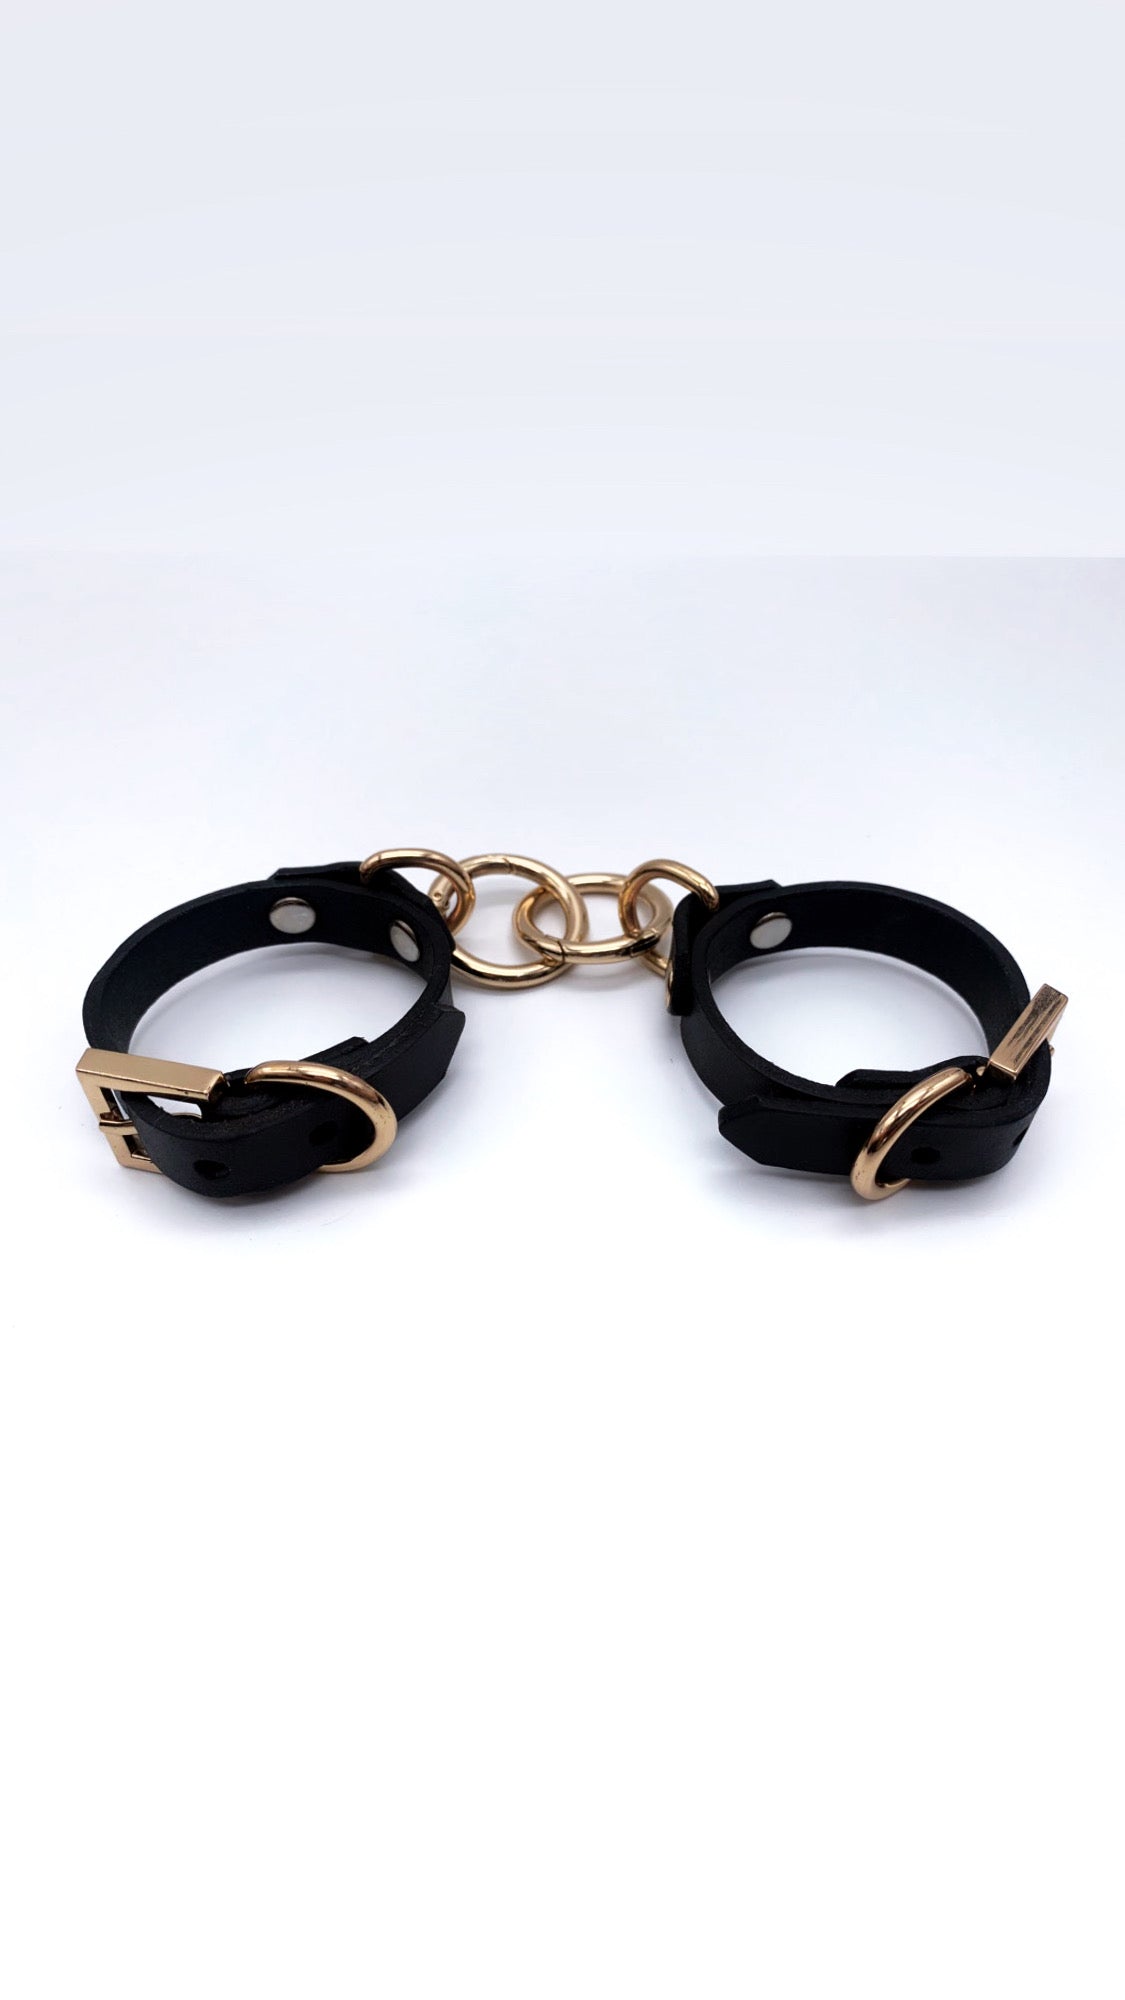 handcuffs leather